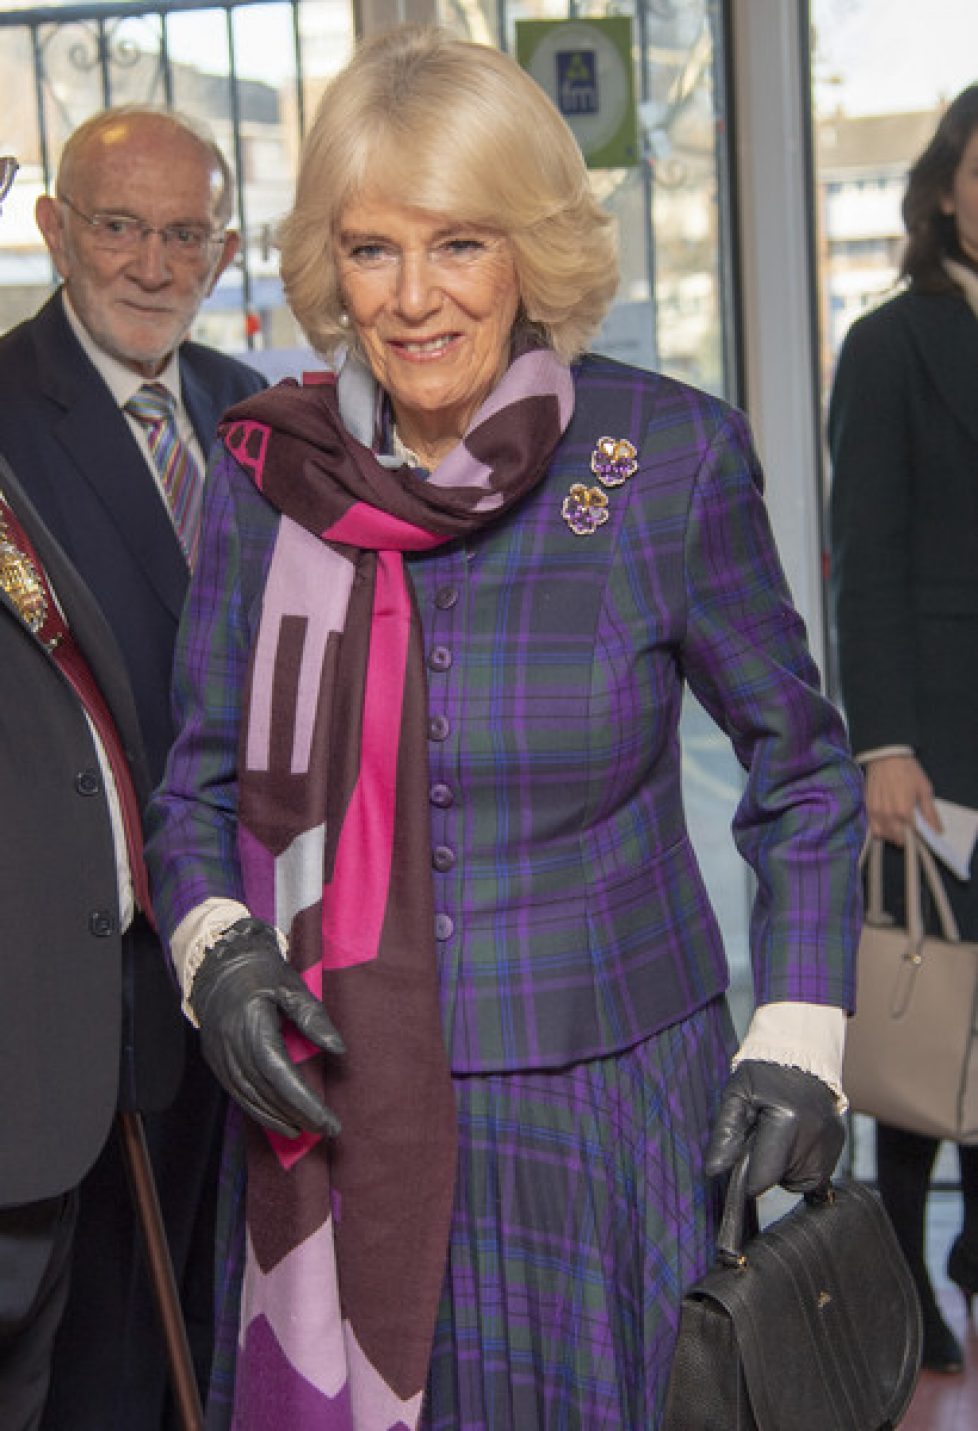 Duchess+Cornwall+Undertakes+Engagements+Greenwich+4IT5PD0m_ECl